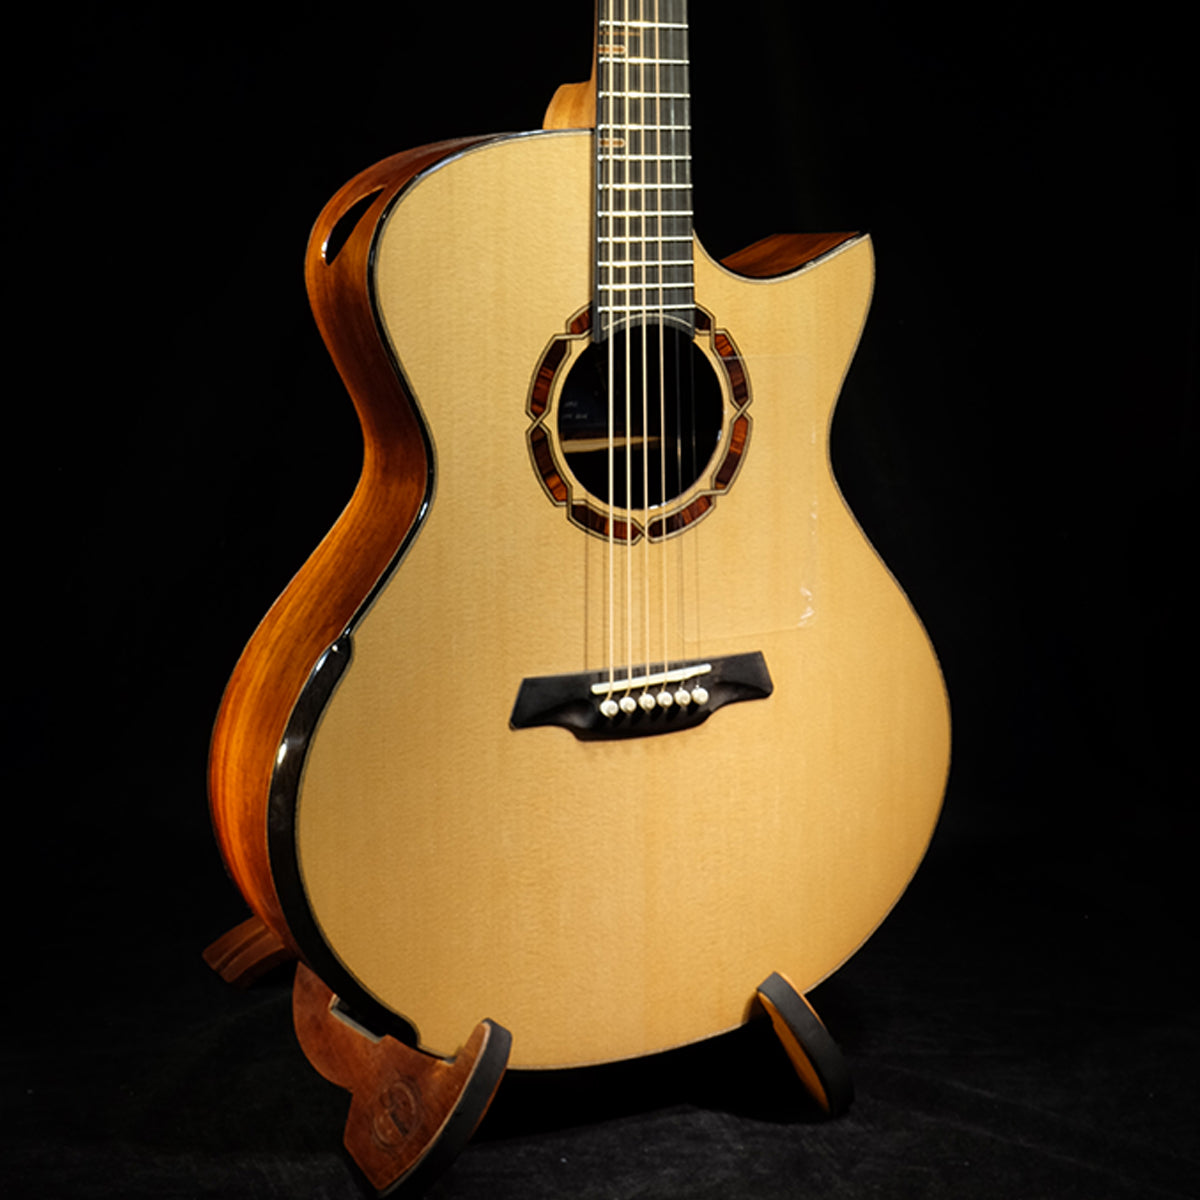 Blue Label MJ Sitka Spruce with Mexican Cocobolo| #9